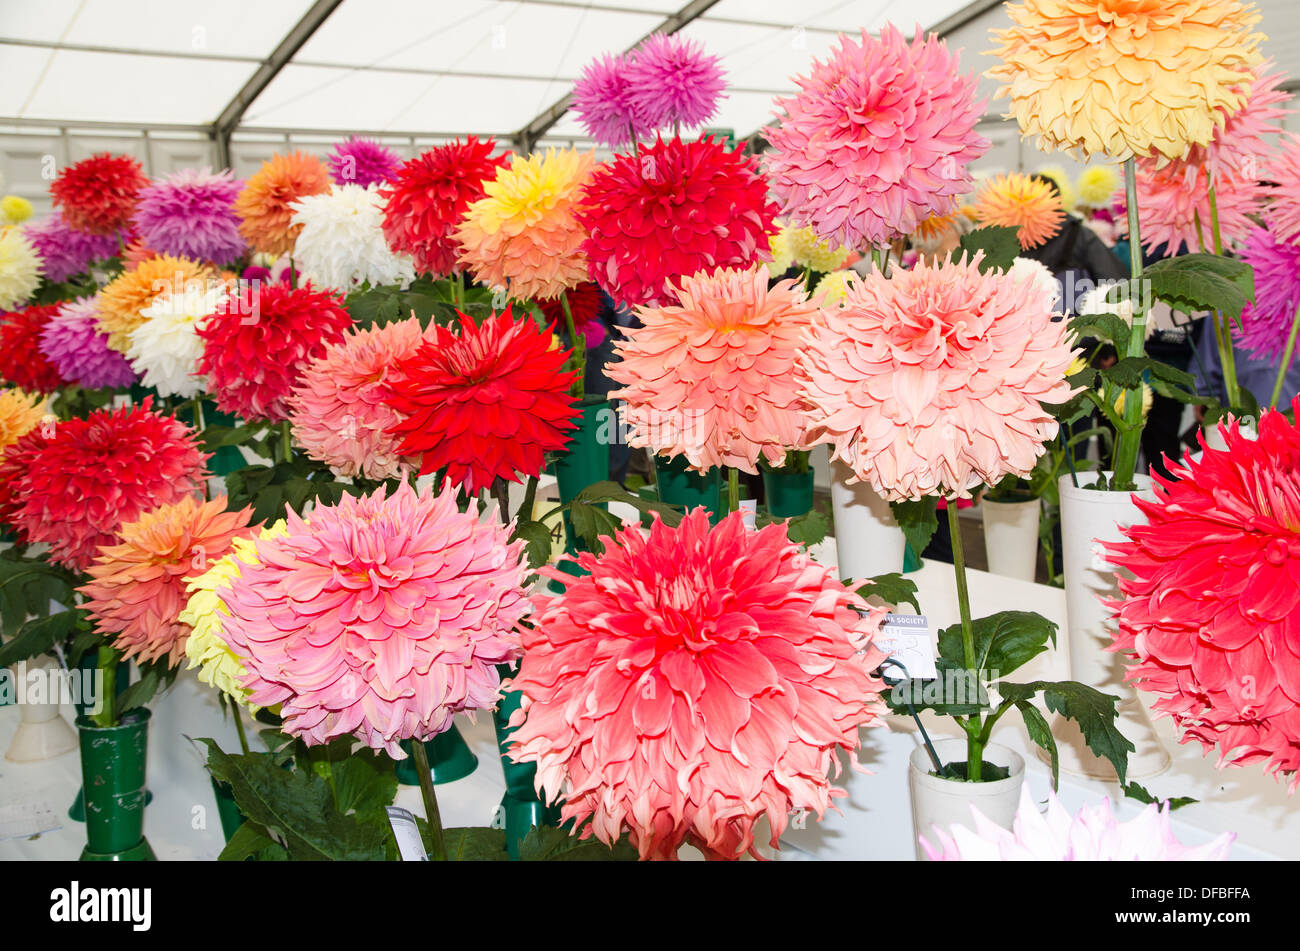 Dahlias in vases on a show bench Stock Photo - Alamy